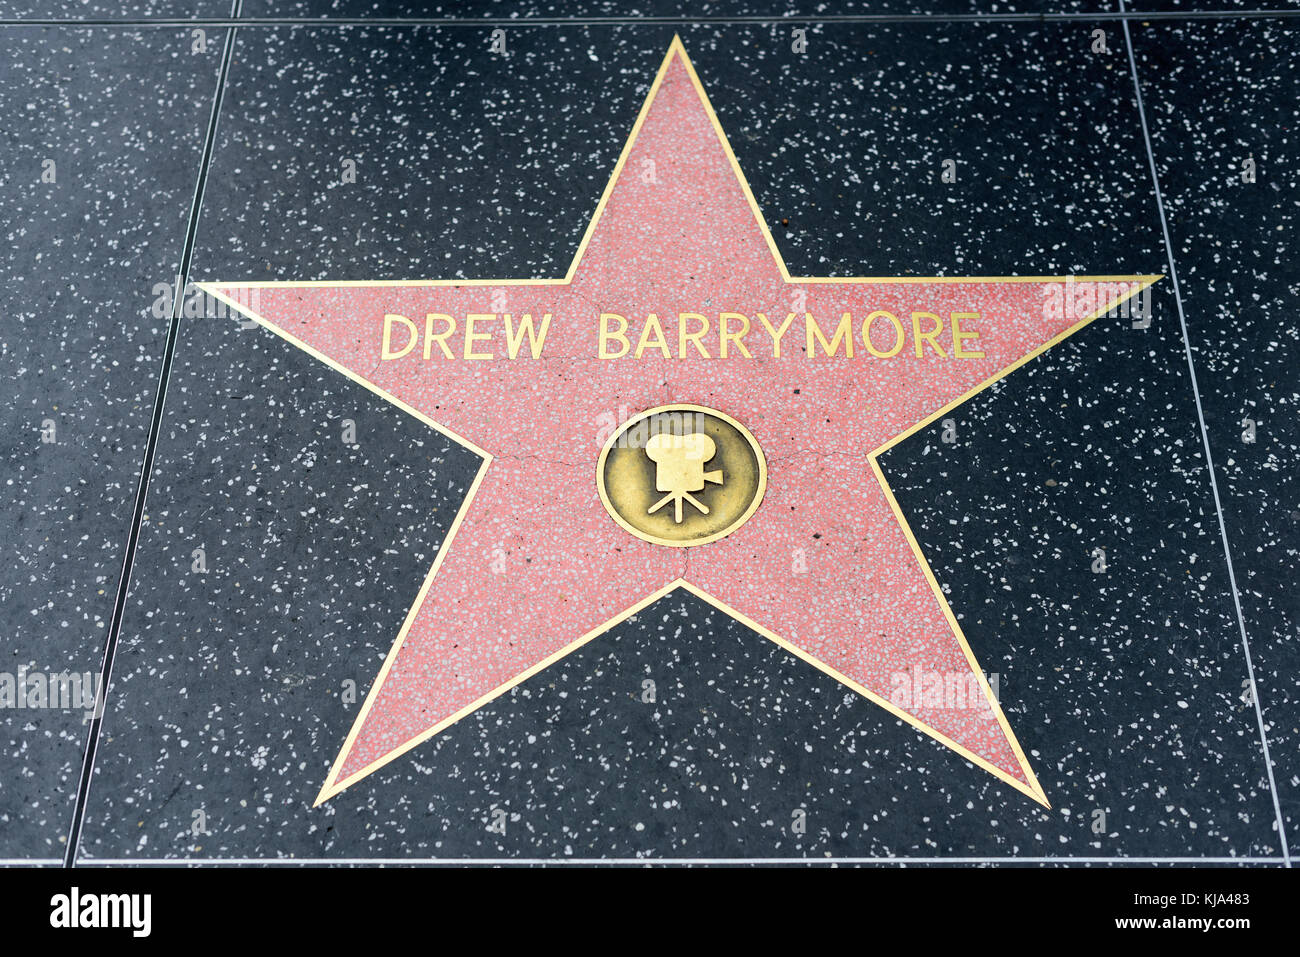 HOLLYWOOD, CA - DECEMBER 06: Drew Barrymore star on the Hollywood Walk of Fame in Hollywood, California on Dec. 6, 2016. Stock Photo